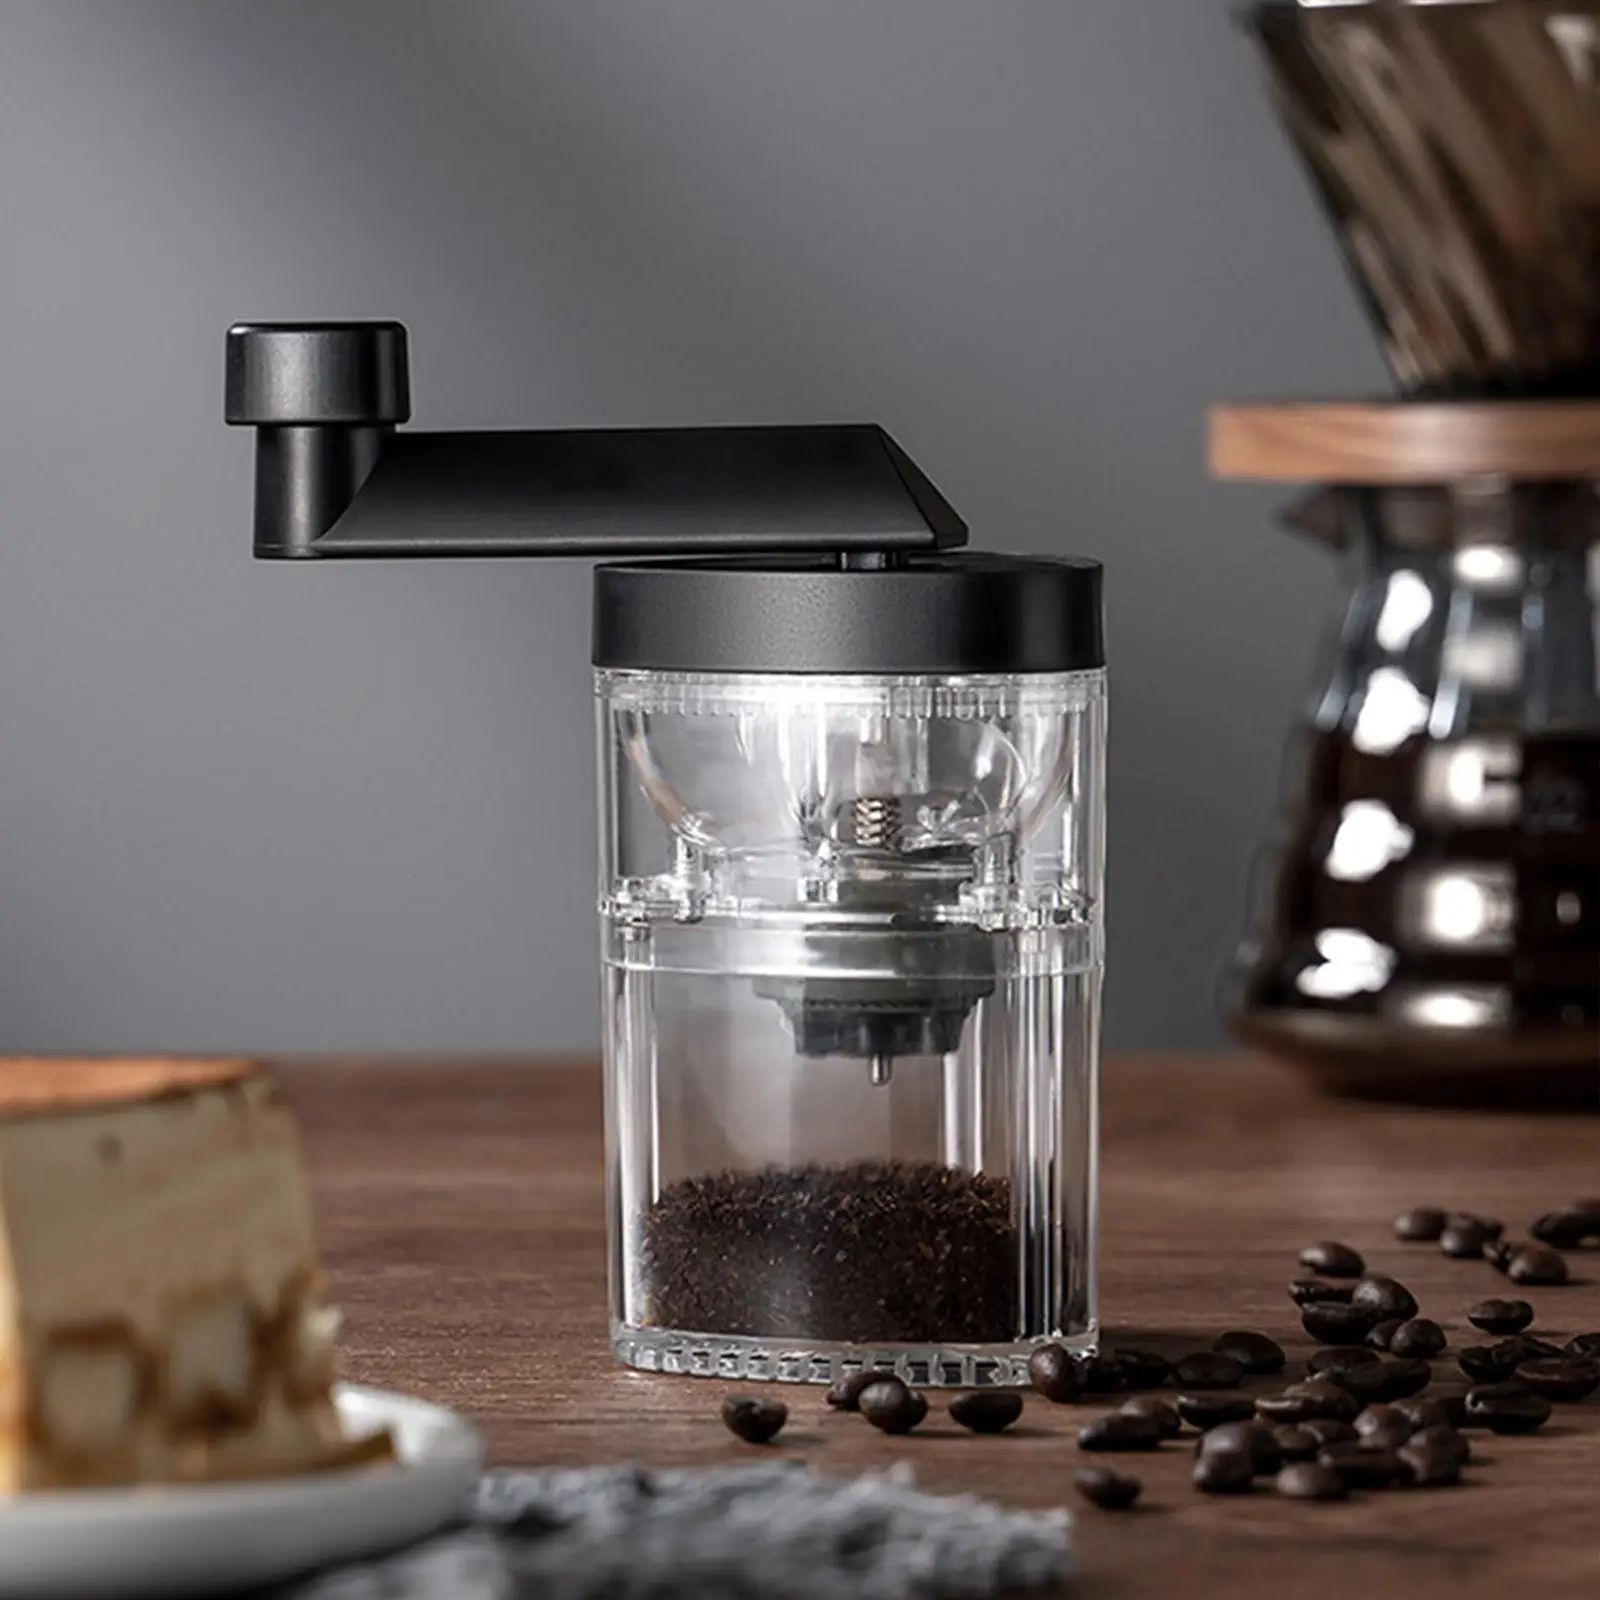 Small Burr Coffee Grinder with Ceramic Burrs Hand Crank Coffee Grinder